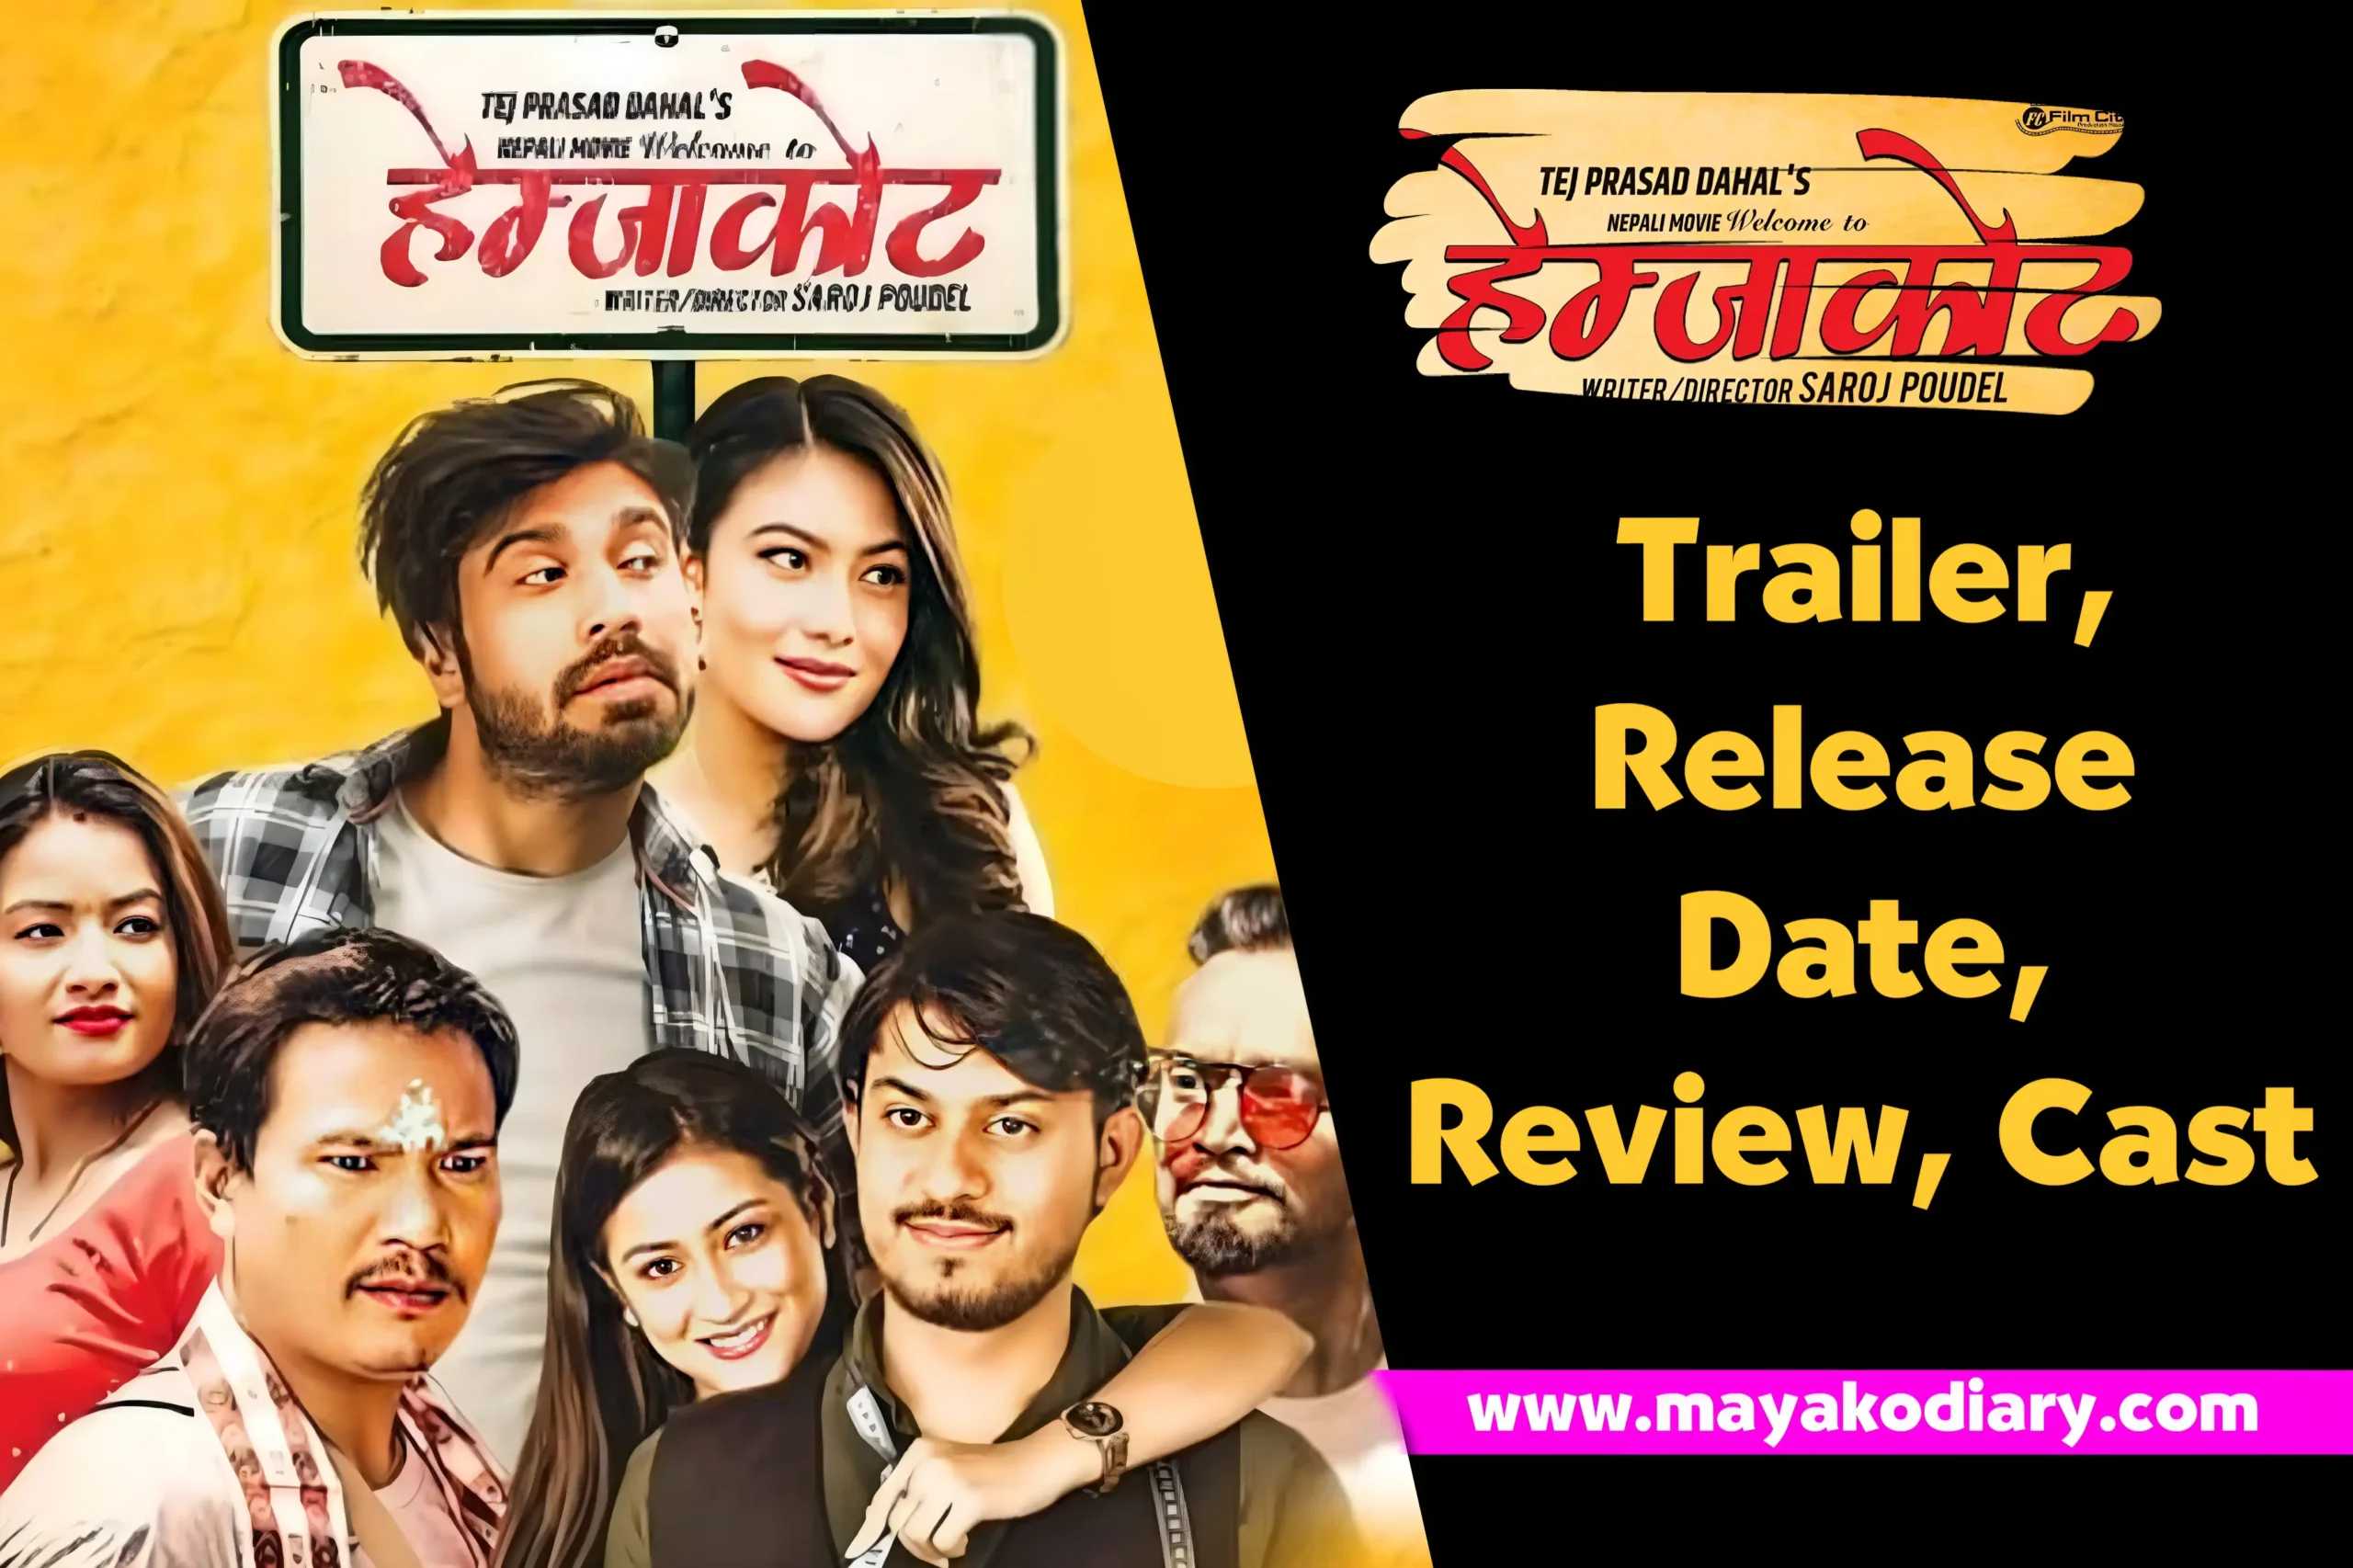 Welcome to Hemjakot Movie Trailer, Cast, Release Date, Review